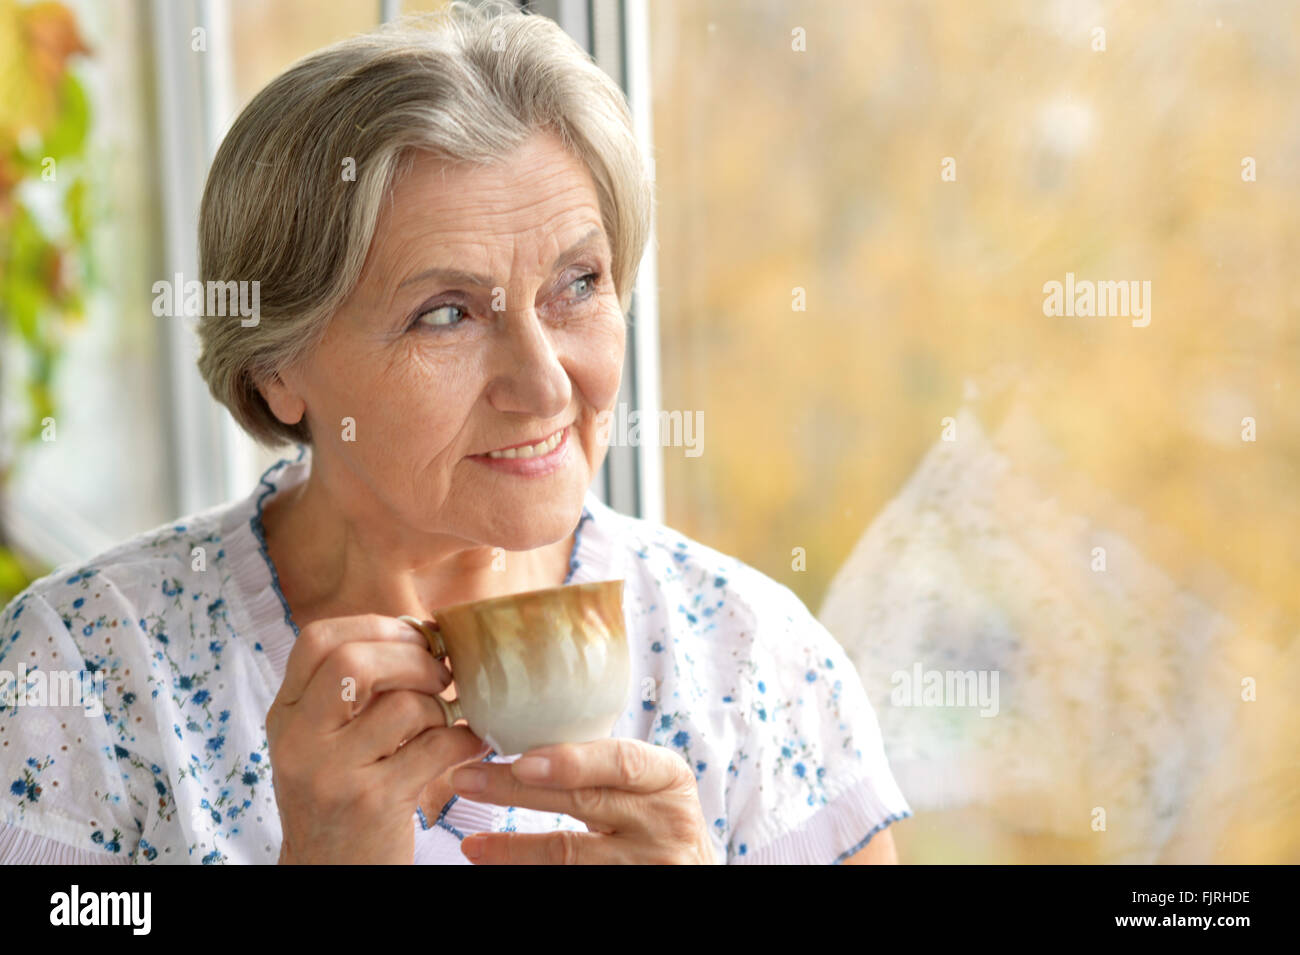 attractive older woman Stock Photo